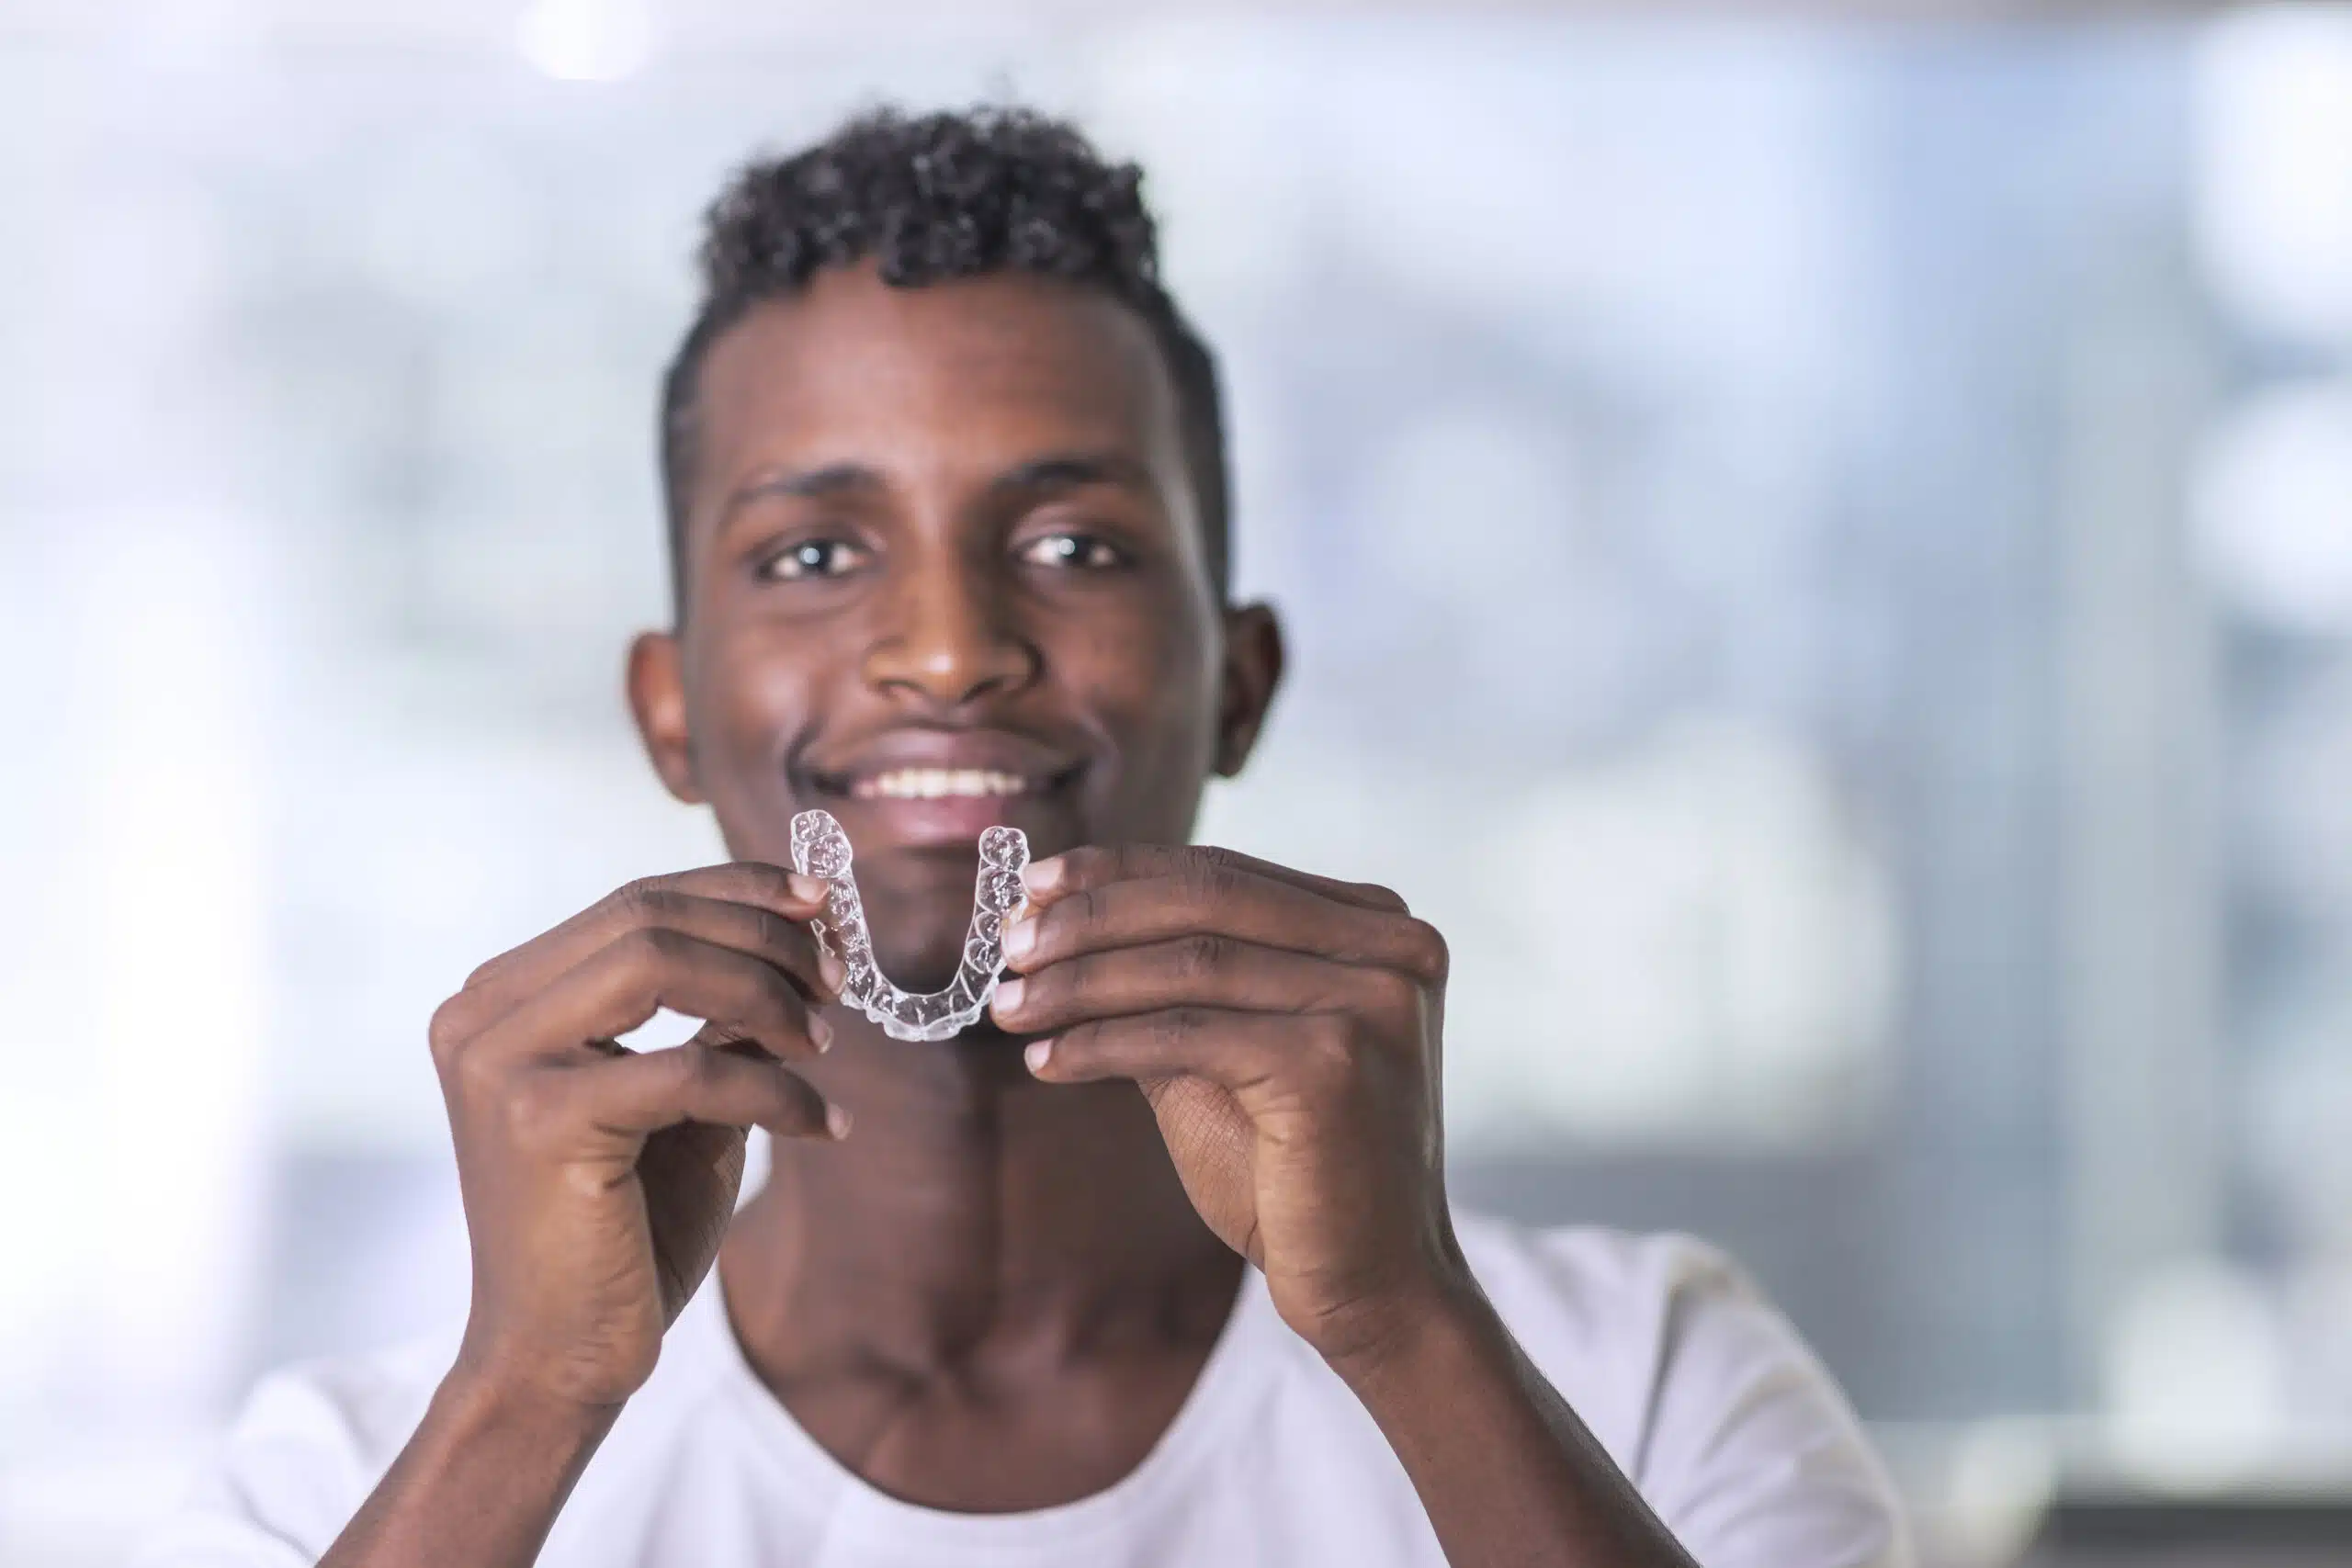 With Invisalign, you can feel confident throughout your orthodontic journey as your teeth straighten through a comfortable, convenient process.